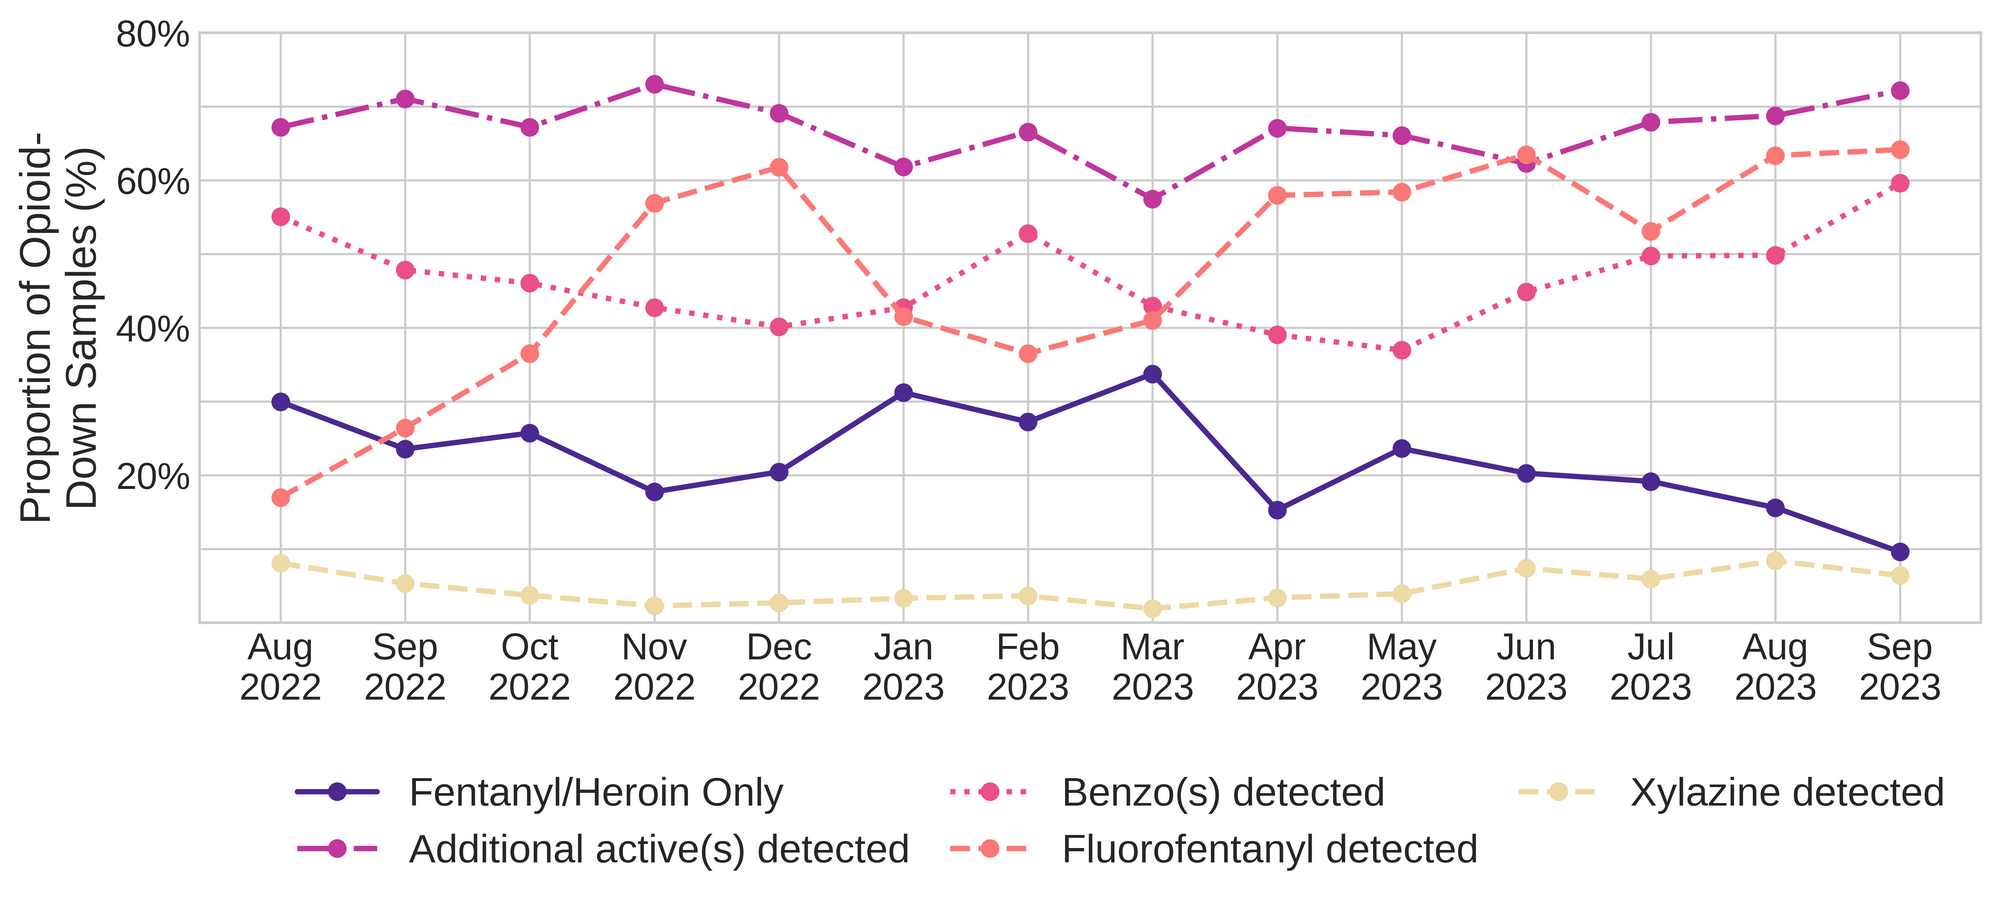 Figure 3. The percentage of expected opioid-down samples checked between August 2022 and September 2023 that only contained fentanyl/heroin actives (solid dark blue), opioid-down samples with an additional active detected (dot-dashed purple), opioid-down samples that contained a benzodiazepine-related drug (dotted magenta), opioid-down samples that contained fluorofentanyl (dashed salmon), and opioid-down samples that contained xylazine (dashed yellow).